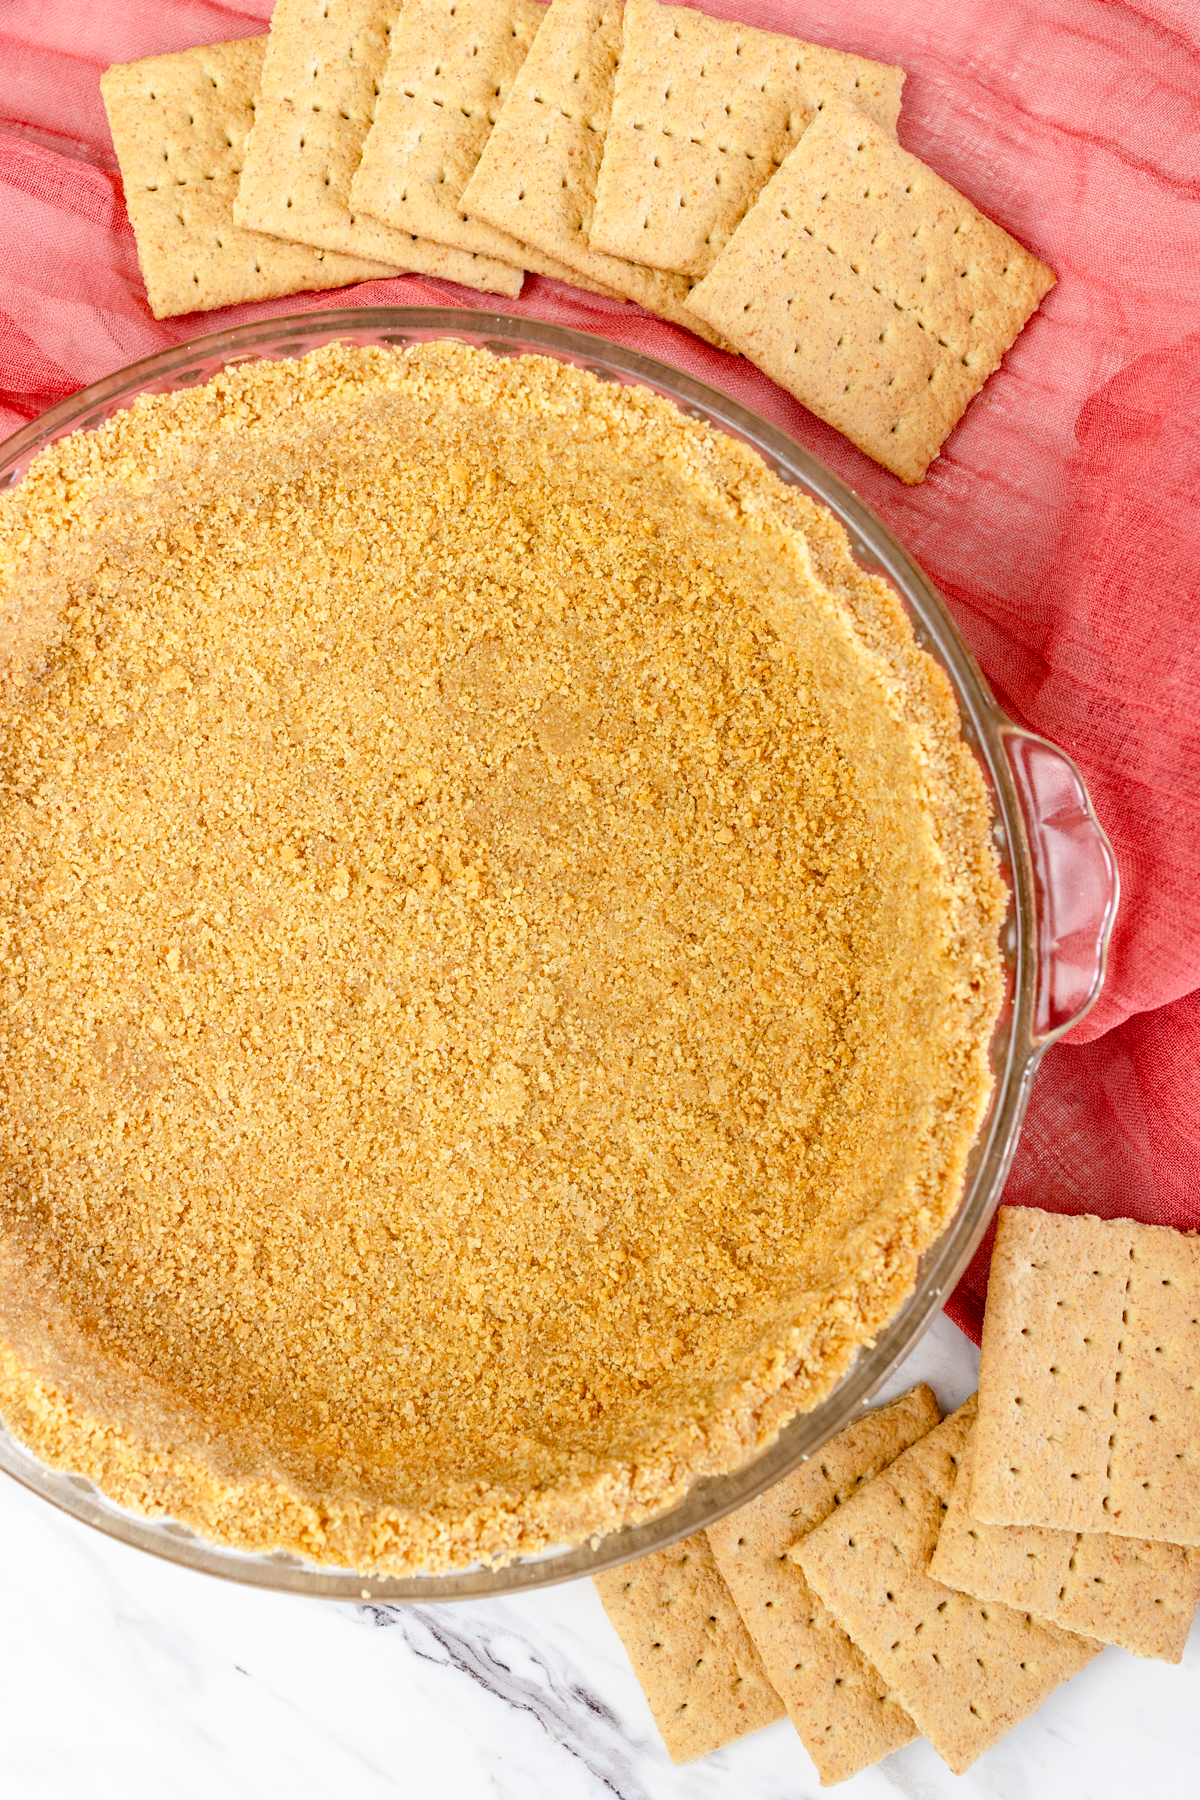 Top view of Graham Cracker crust in a pie dish on a table with a red tea towel, with whole graham crackers next to it, fanned out. 